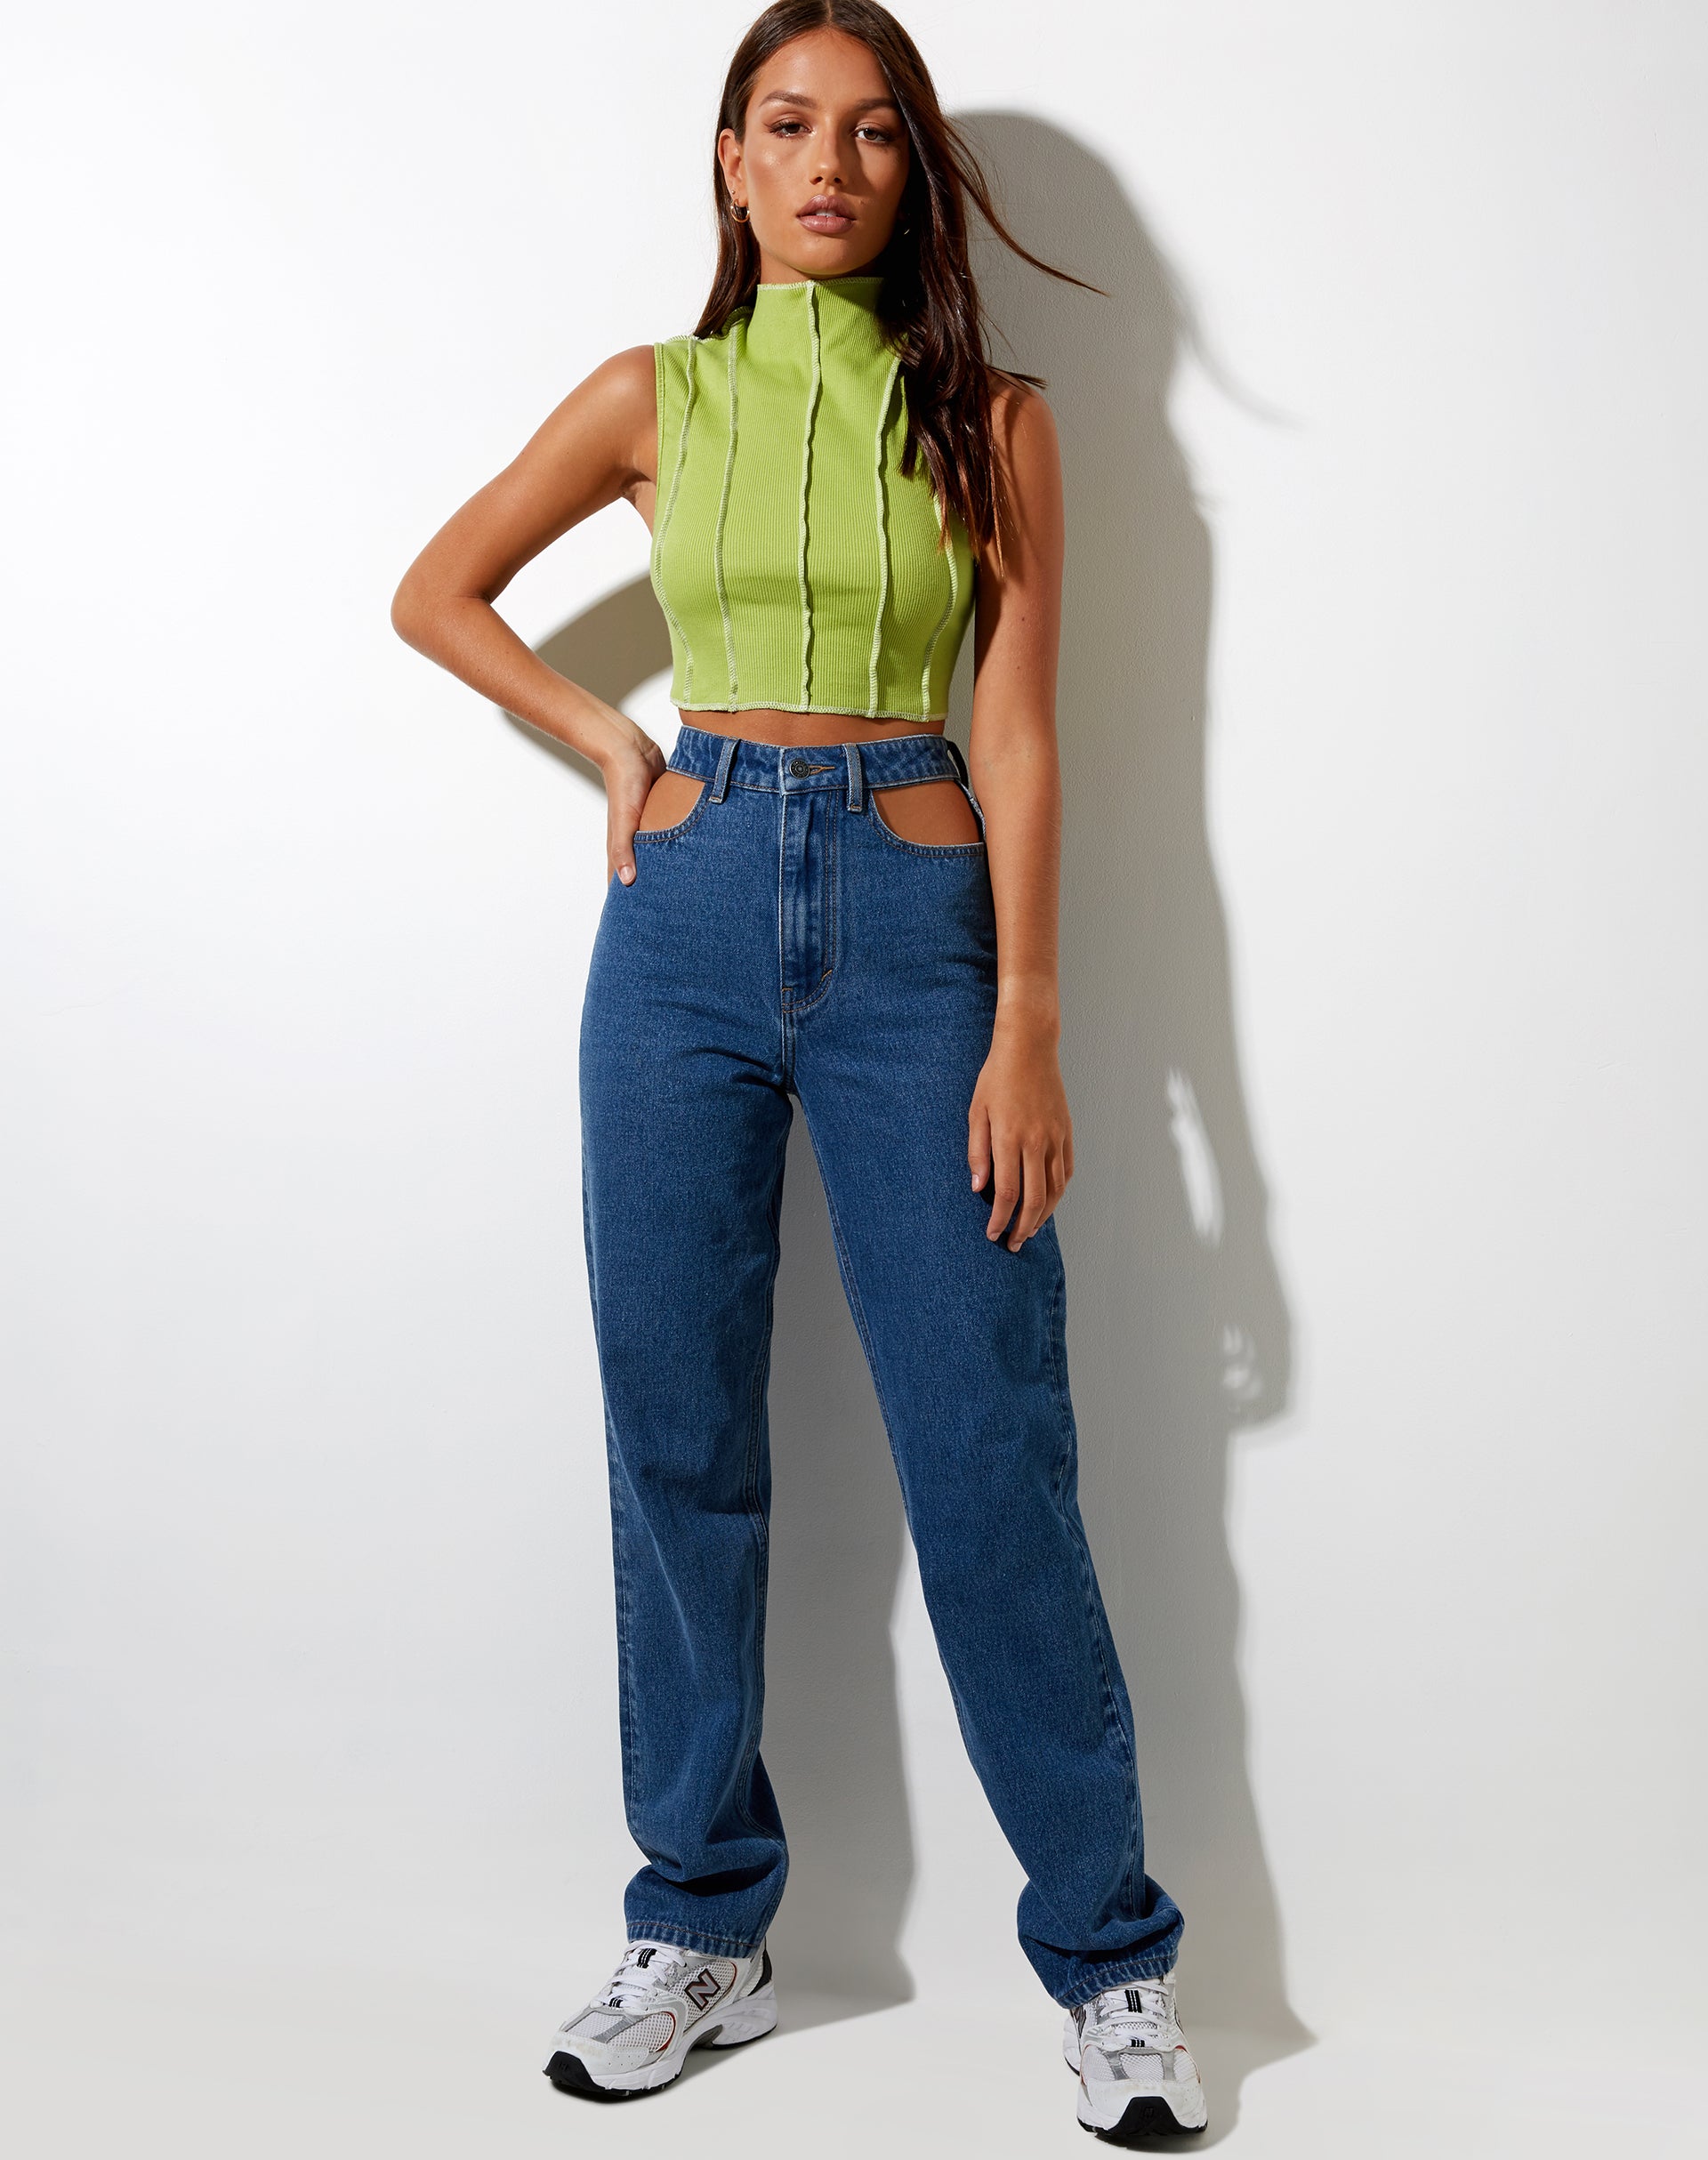 Green High Neck Crop Top with Stitching | Ivy – motelrocks.com